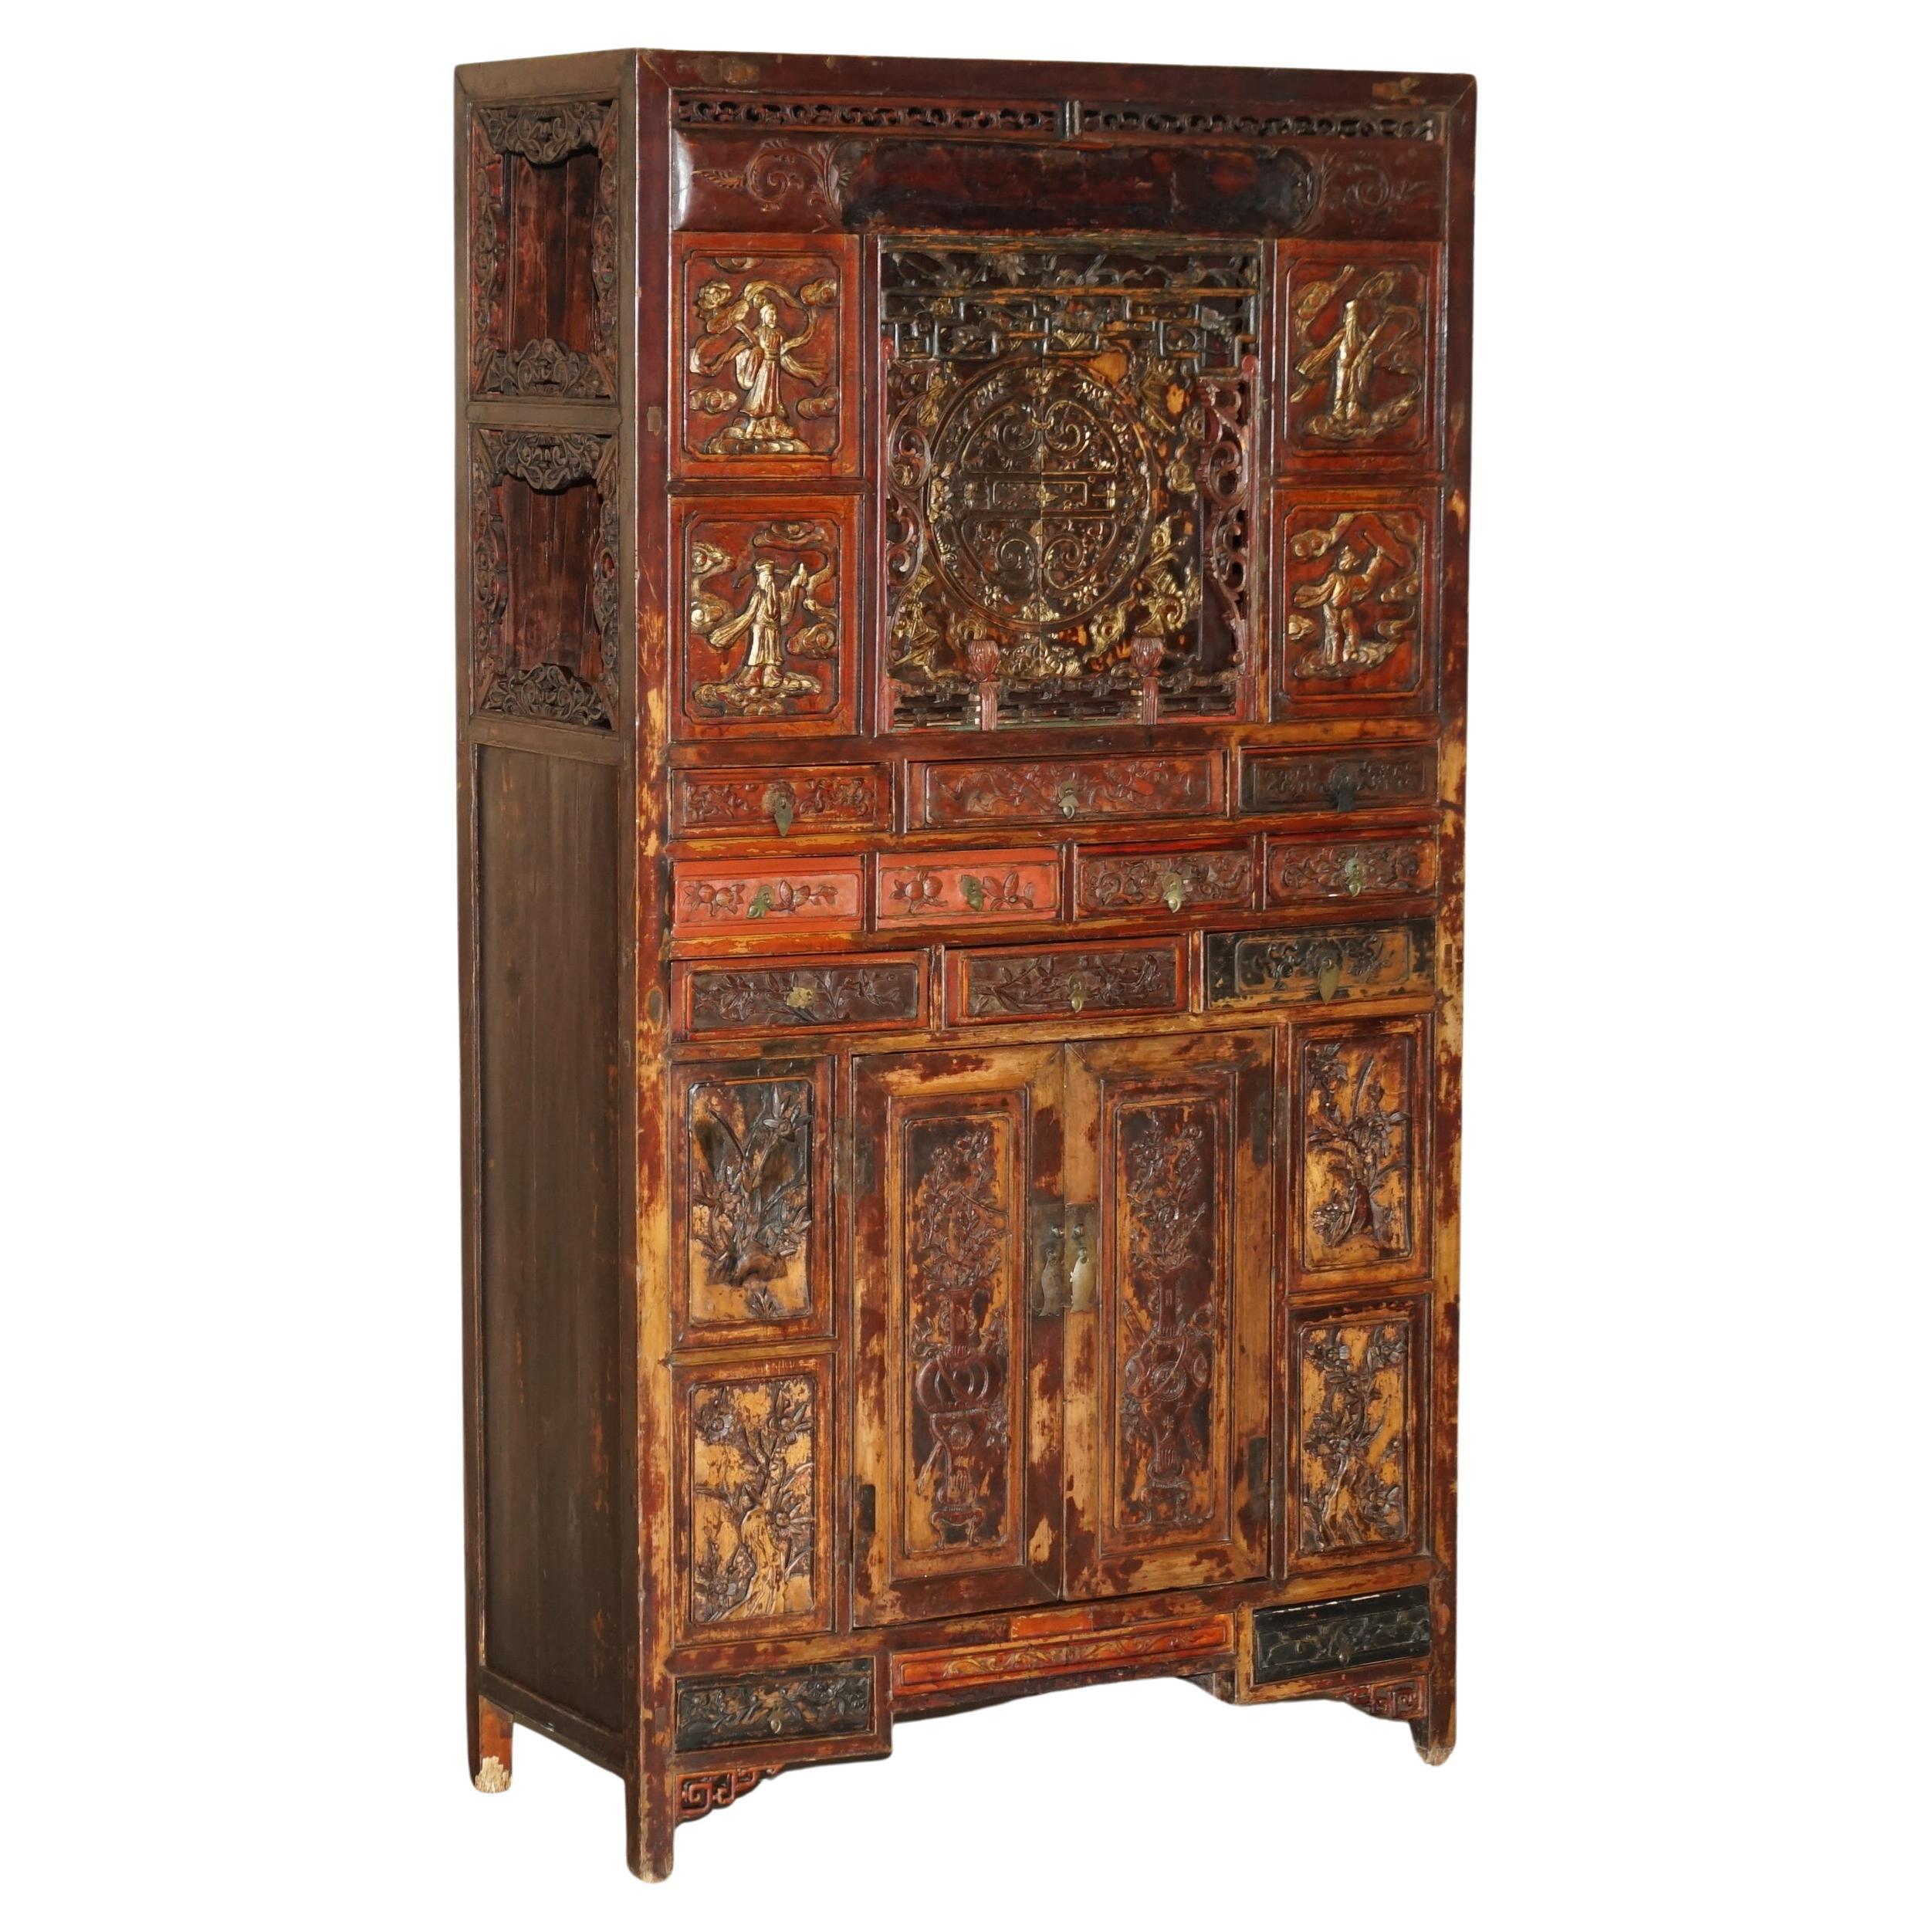 Antique circa 1860 Chinese Hand Painted Wedding Cabinet Housekeepers Cupboard (Cabinet de mariage chinois peint à la main)